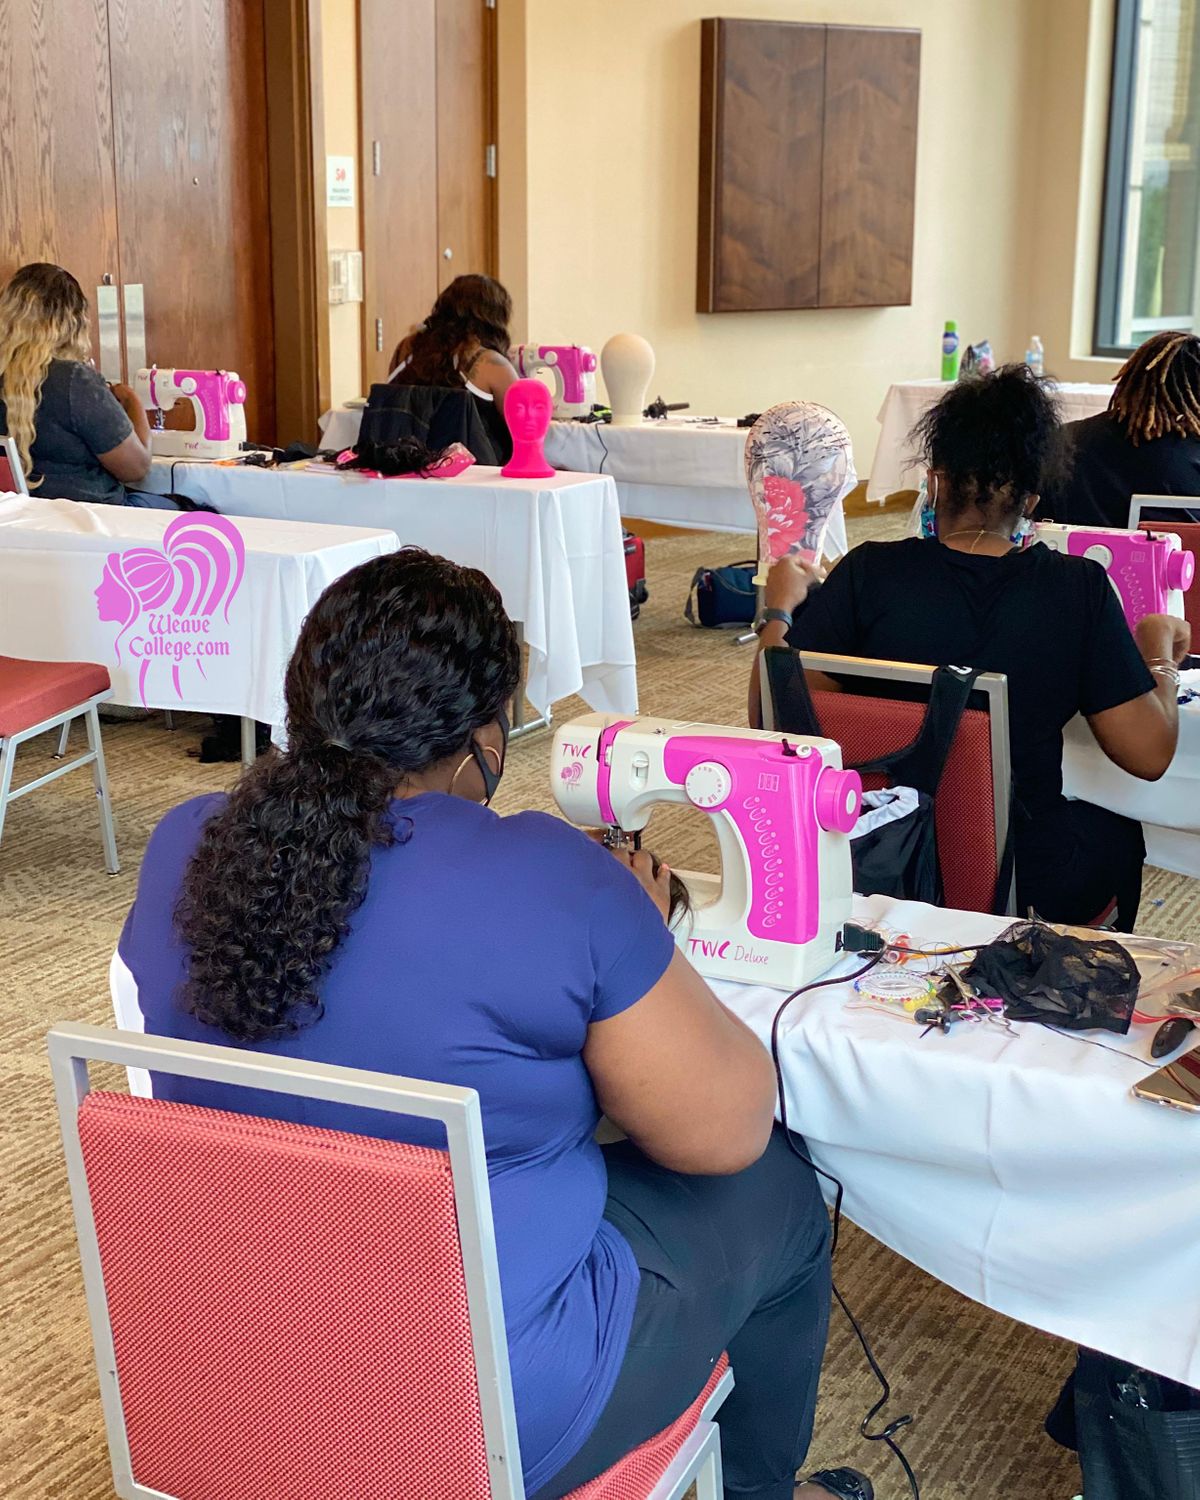 Atlanta, GA | Lace Front Wig Making Class with Sewing Machine